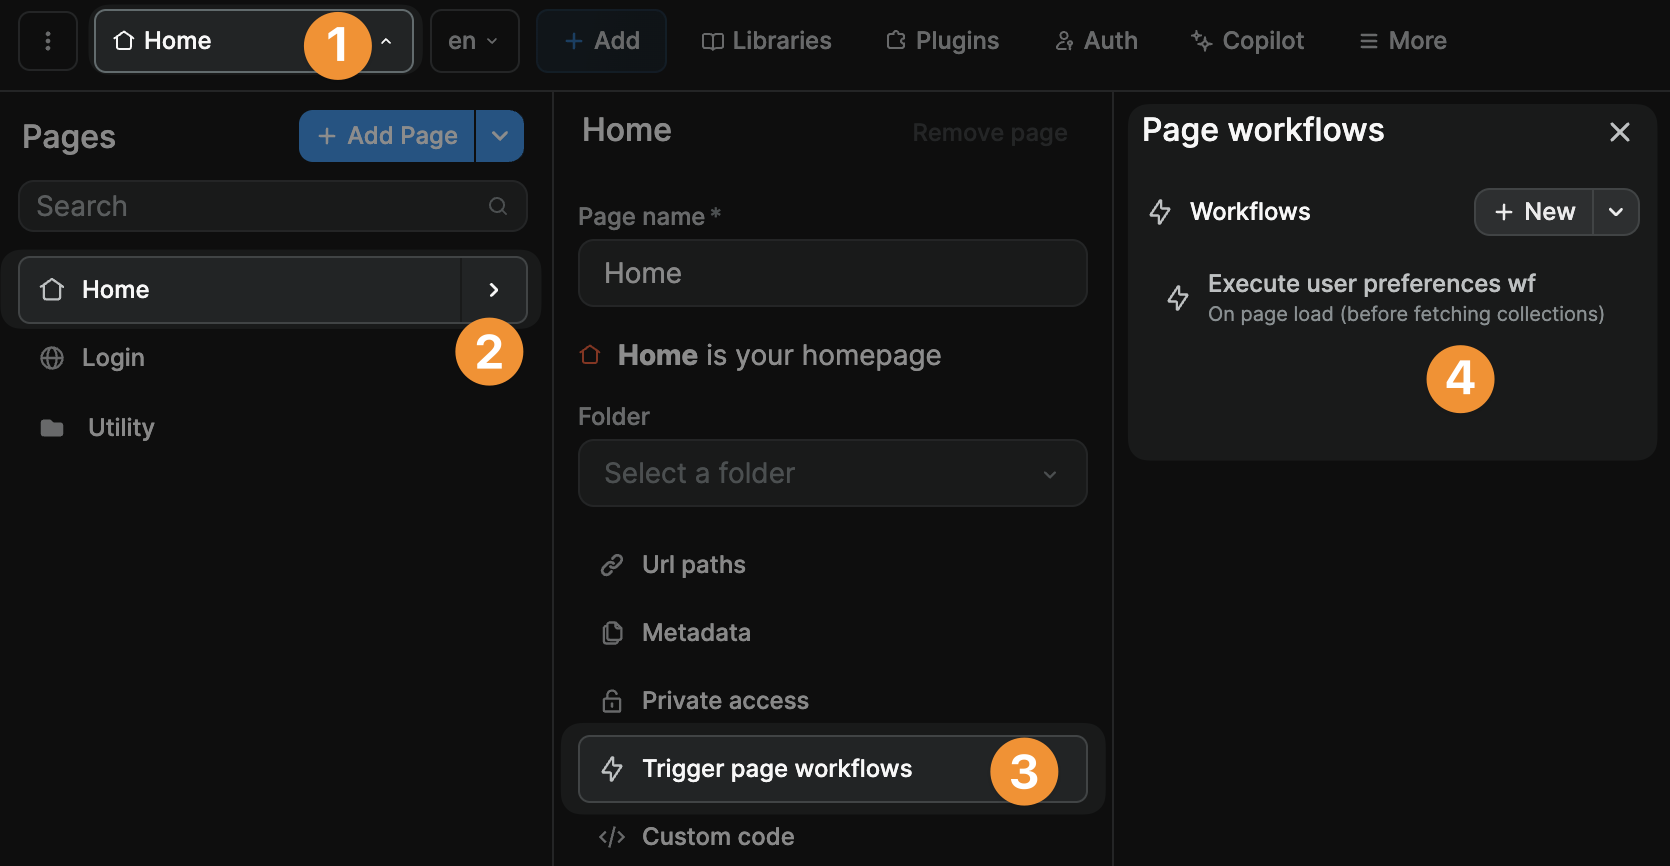 Workflows triggered on the page